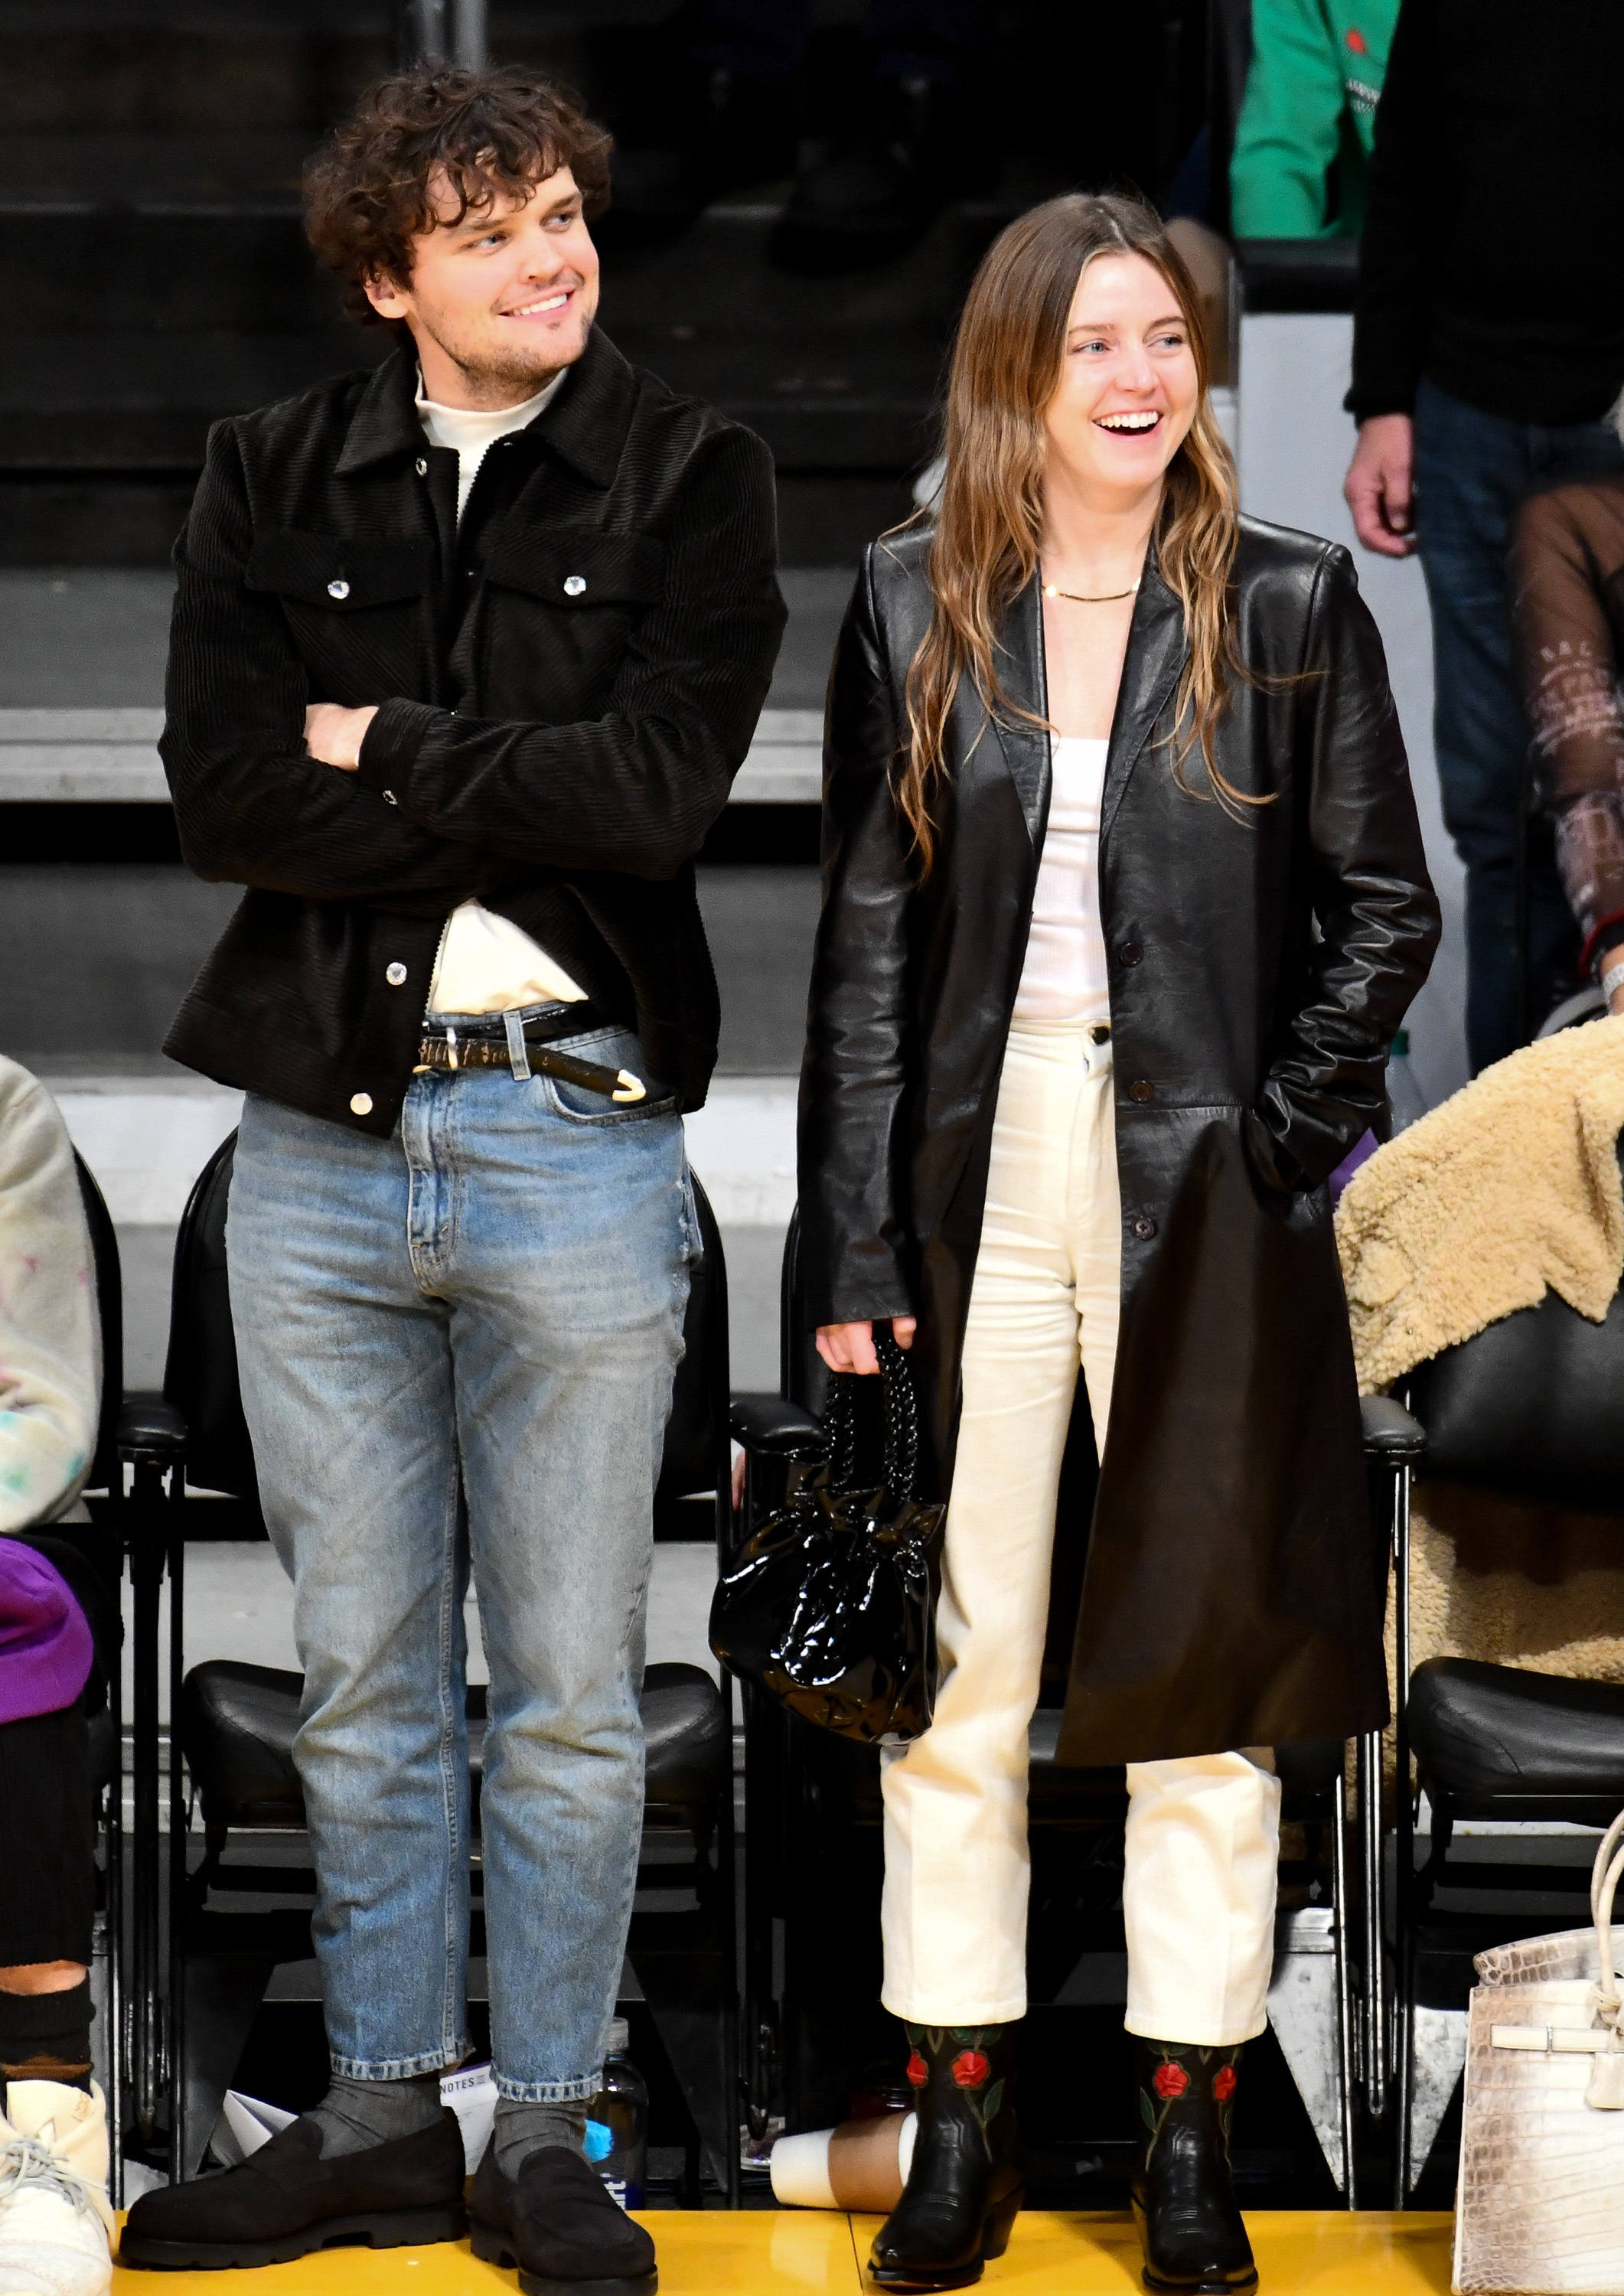 Ray Nicholson and Lorraine Nicholson at a basketball game between the Los Angeles Lakers and the Los Angeles Clippers in Los Angeles, California on December 25, 2019 | Source: Getty Images